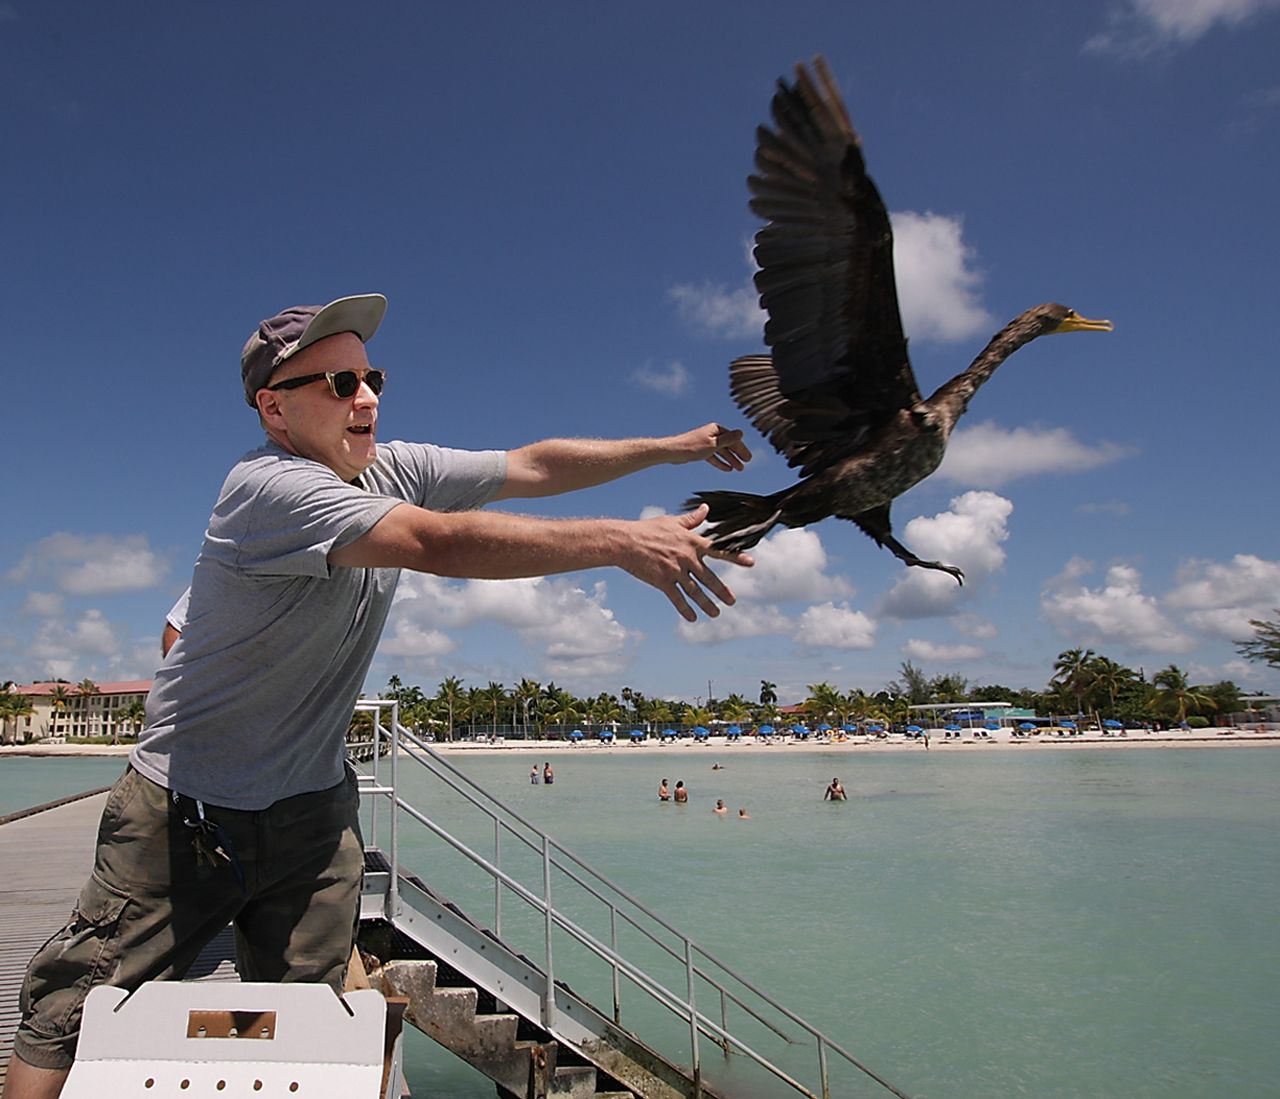 Tom Sweets releases a rehabilitated cormorant from the Edward B. Knight (White Street) Pier in Key West. Photo by Mike Hertz; courtesy of the Keys Citizen.